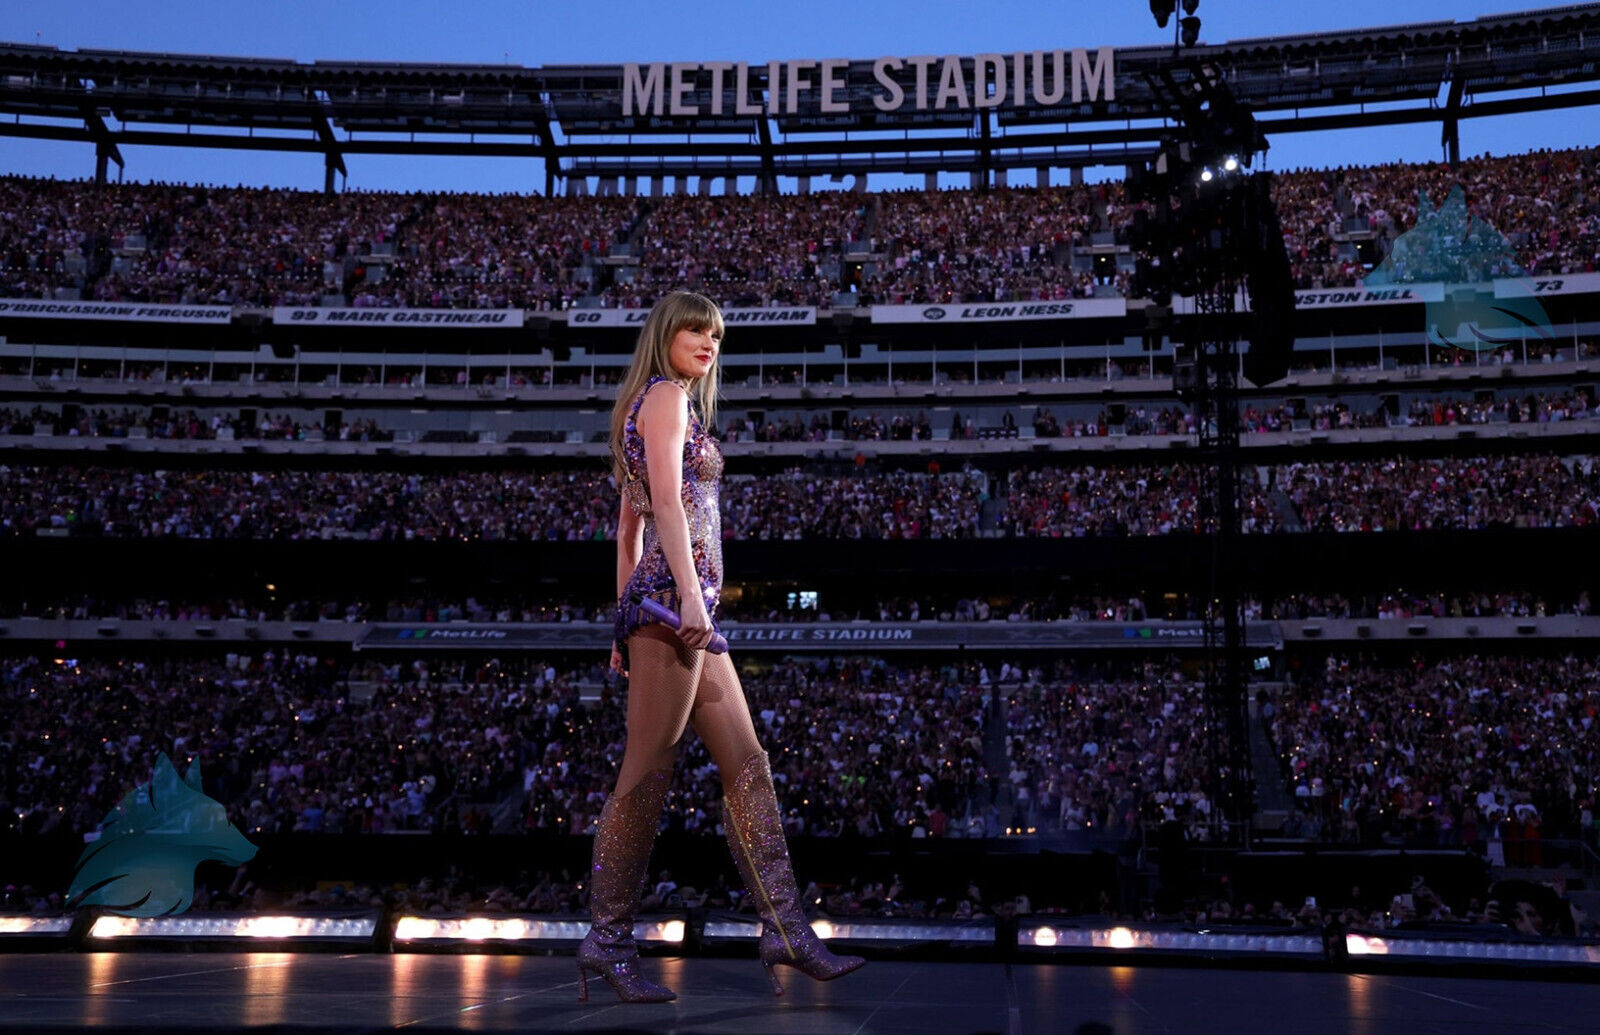 Taylor Swift in MetLife Stadium East Rutherford NJ Poster Size Photo Reprint